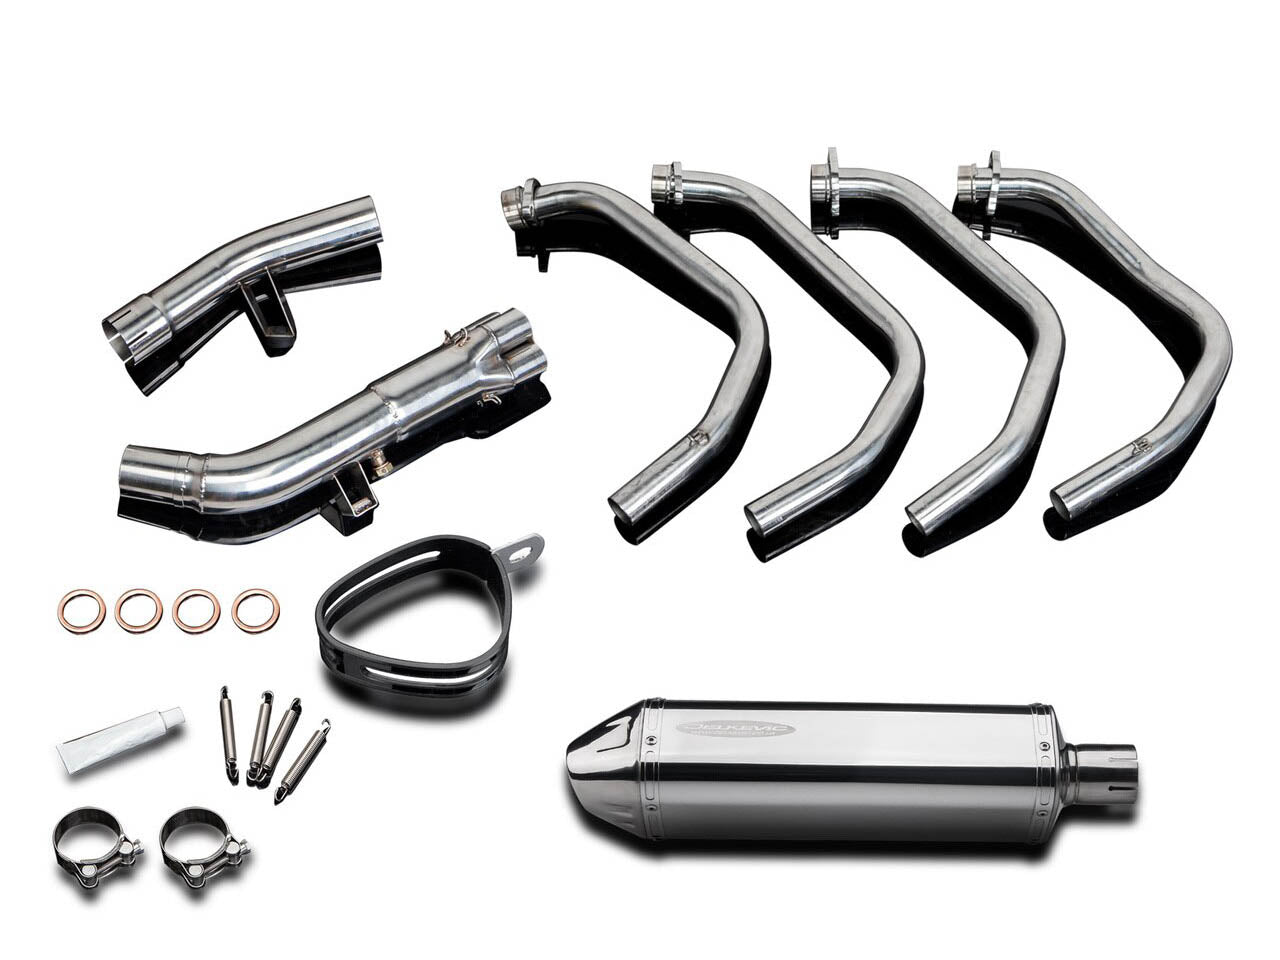 DELKEVIC Suzuki GSX1250FA Traveller Full Exhaust System with 13" Tri-Oval Silencer